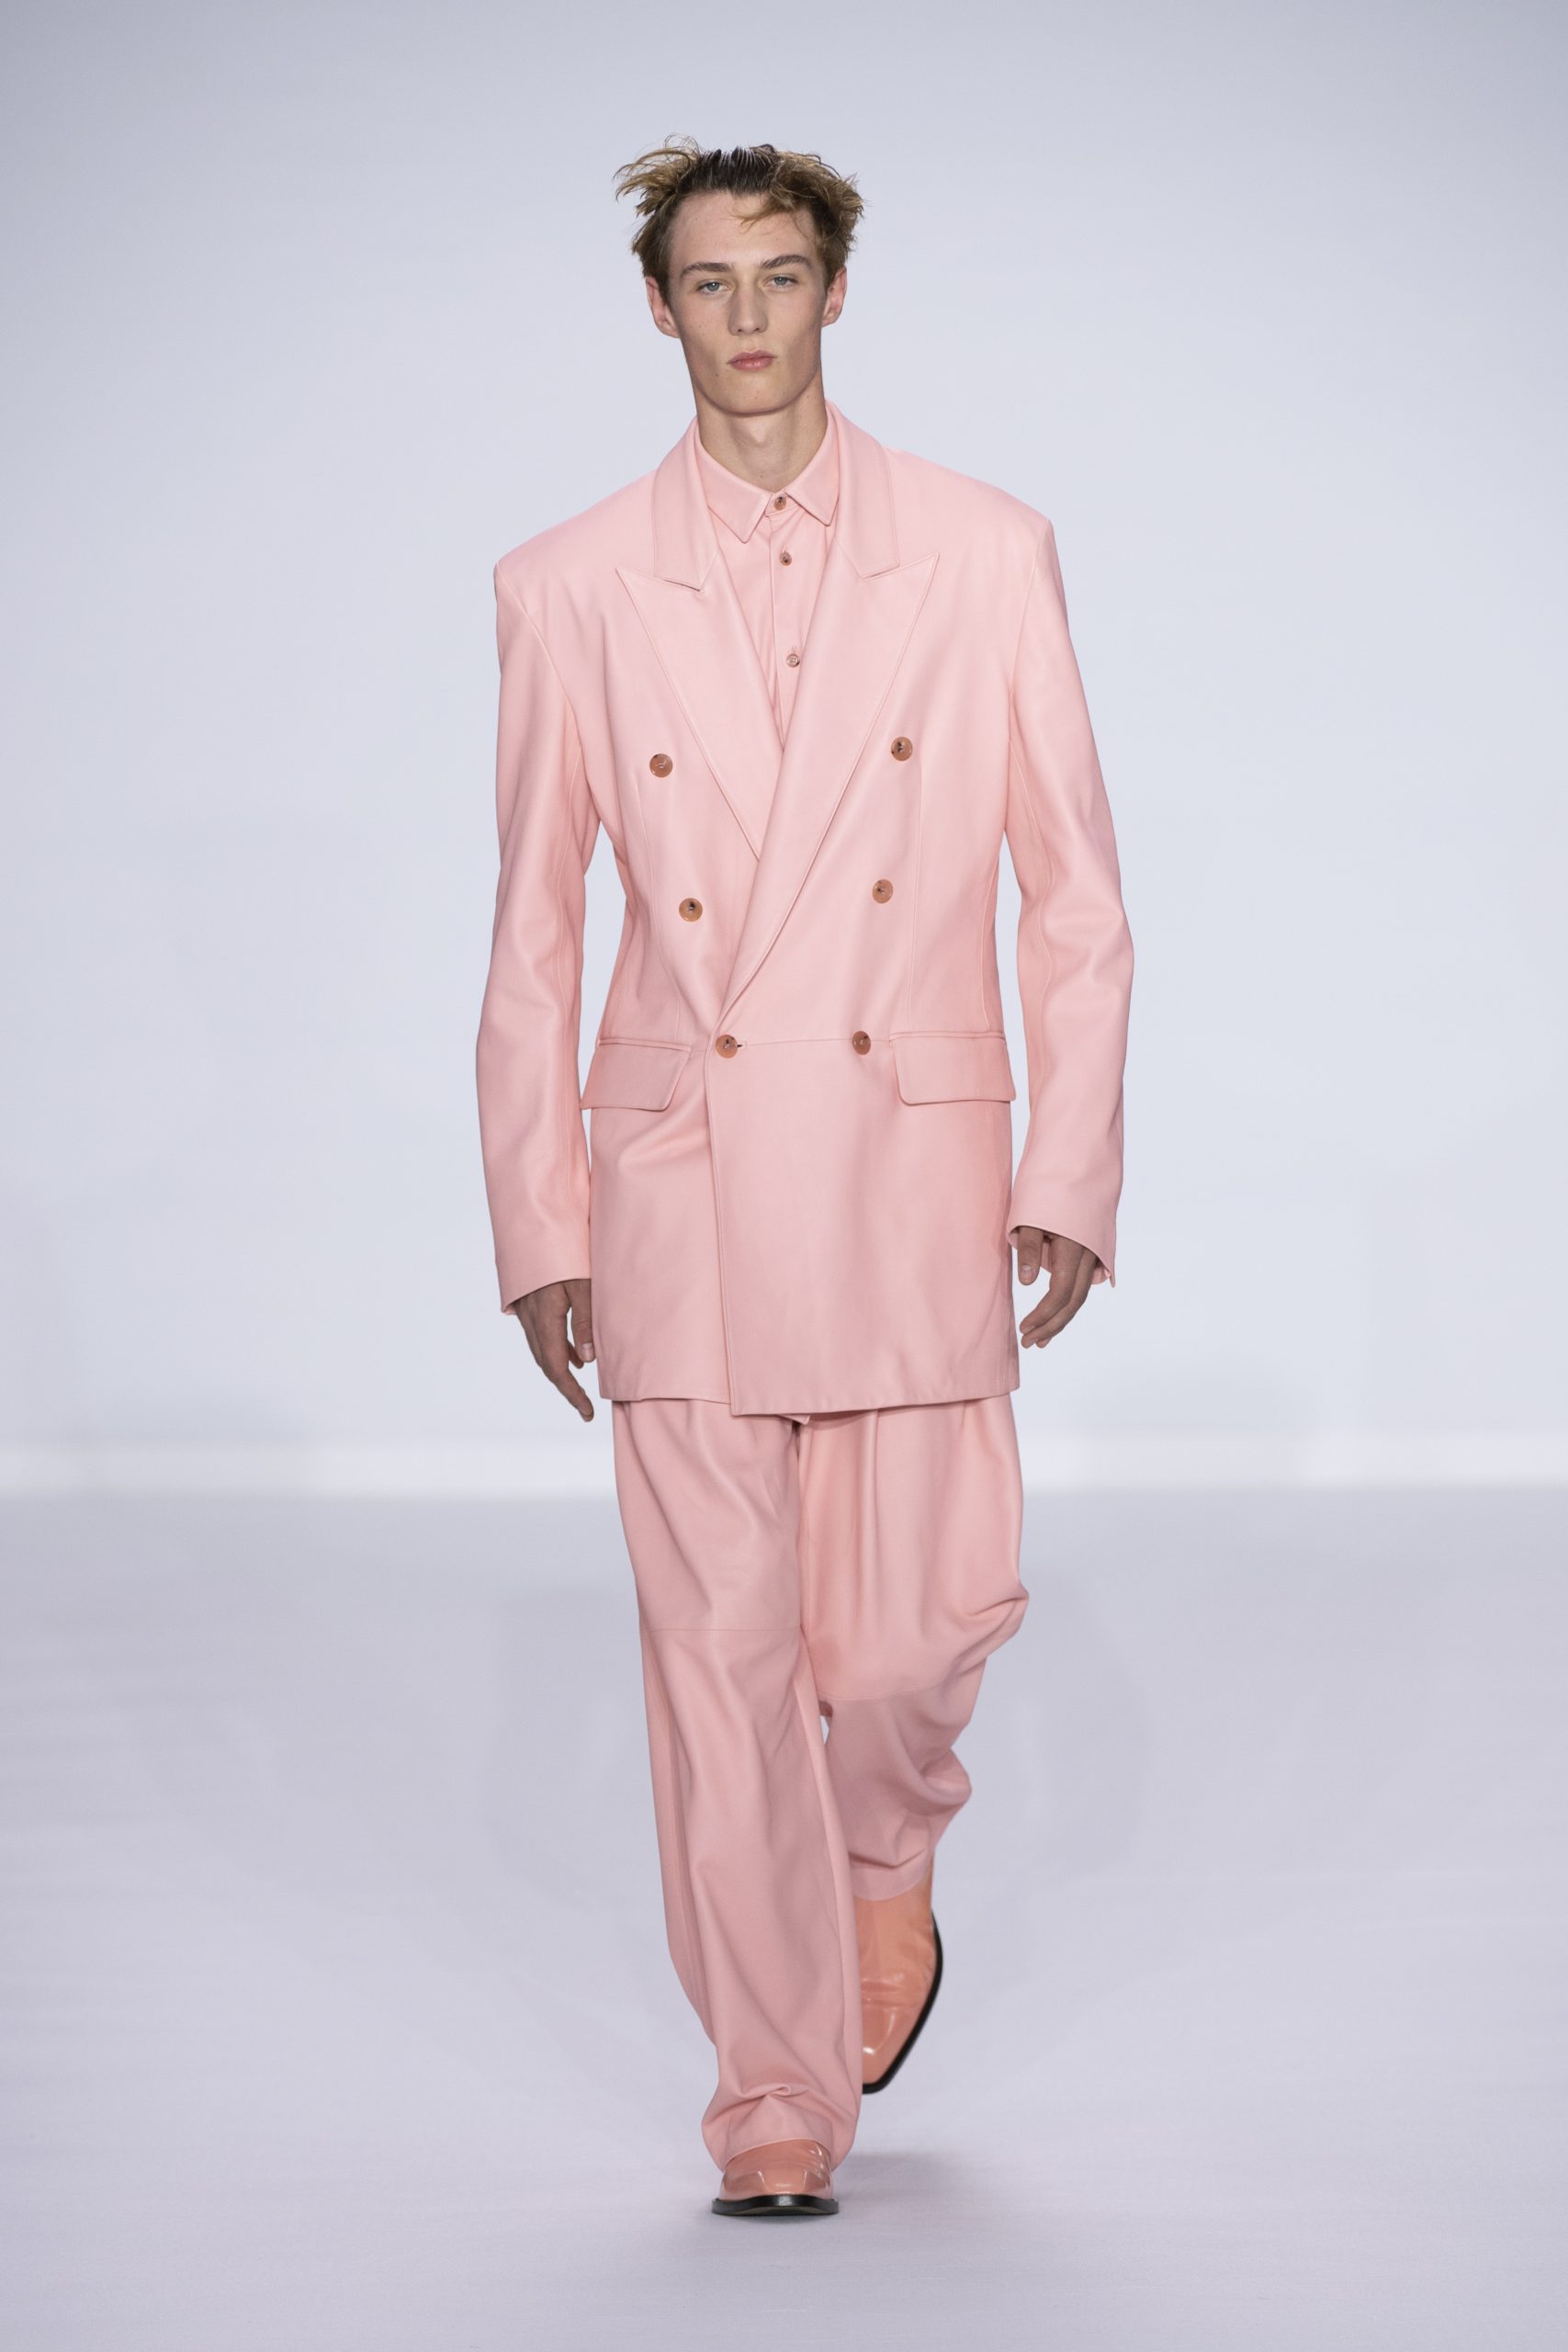 Revitalizing the English Tradition: Paul Smith SS20 Collection Brings ...